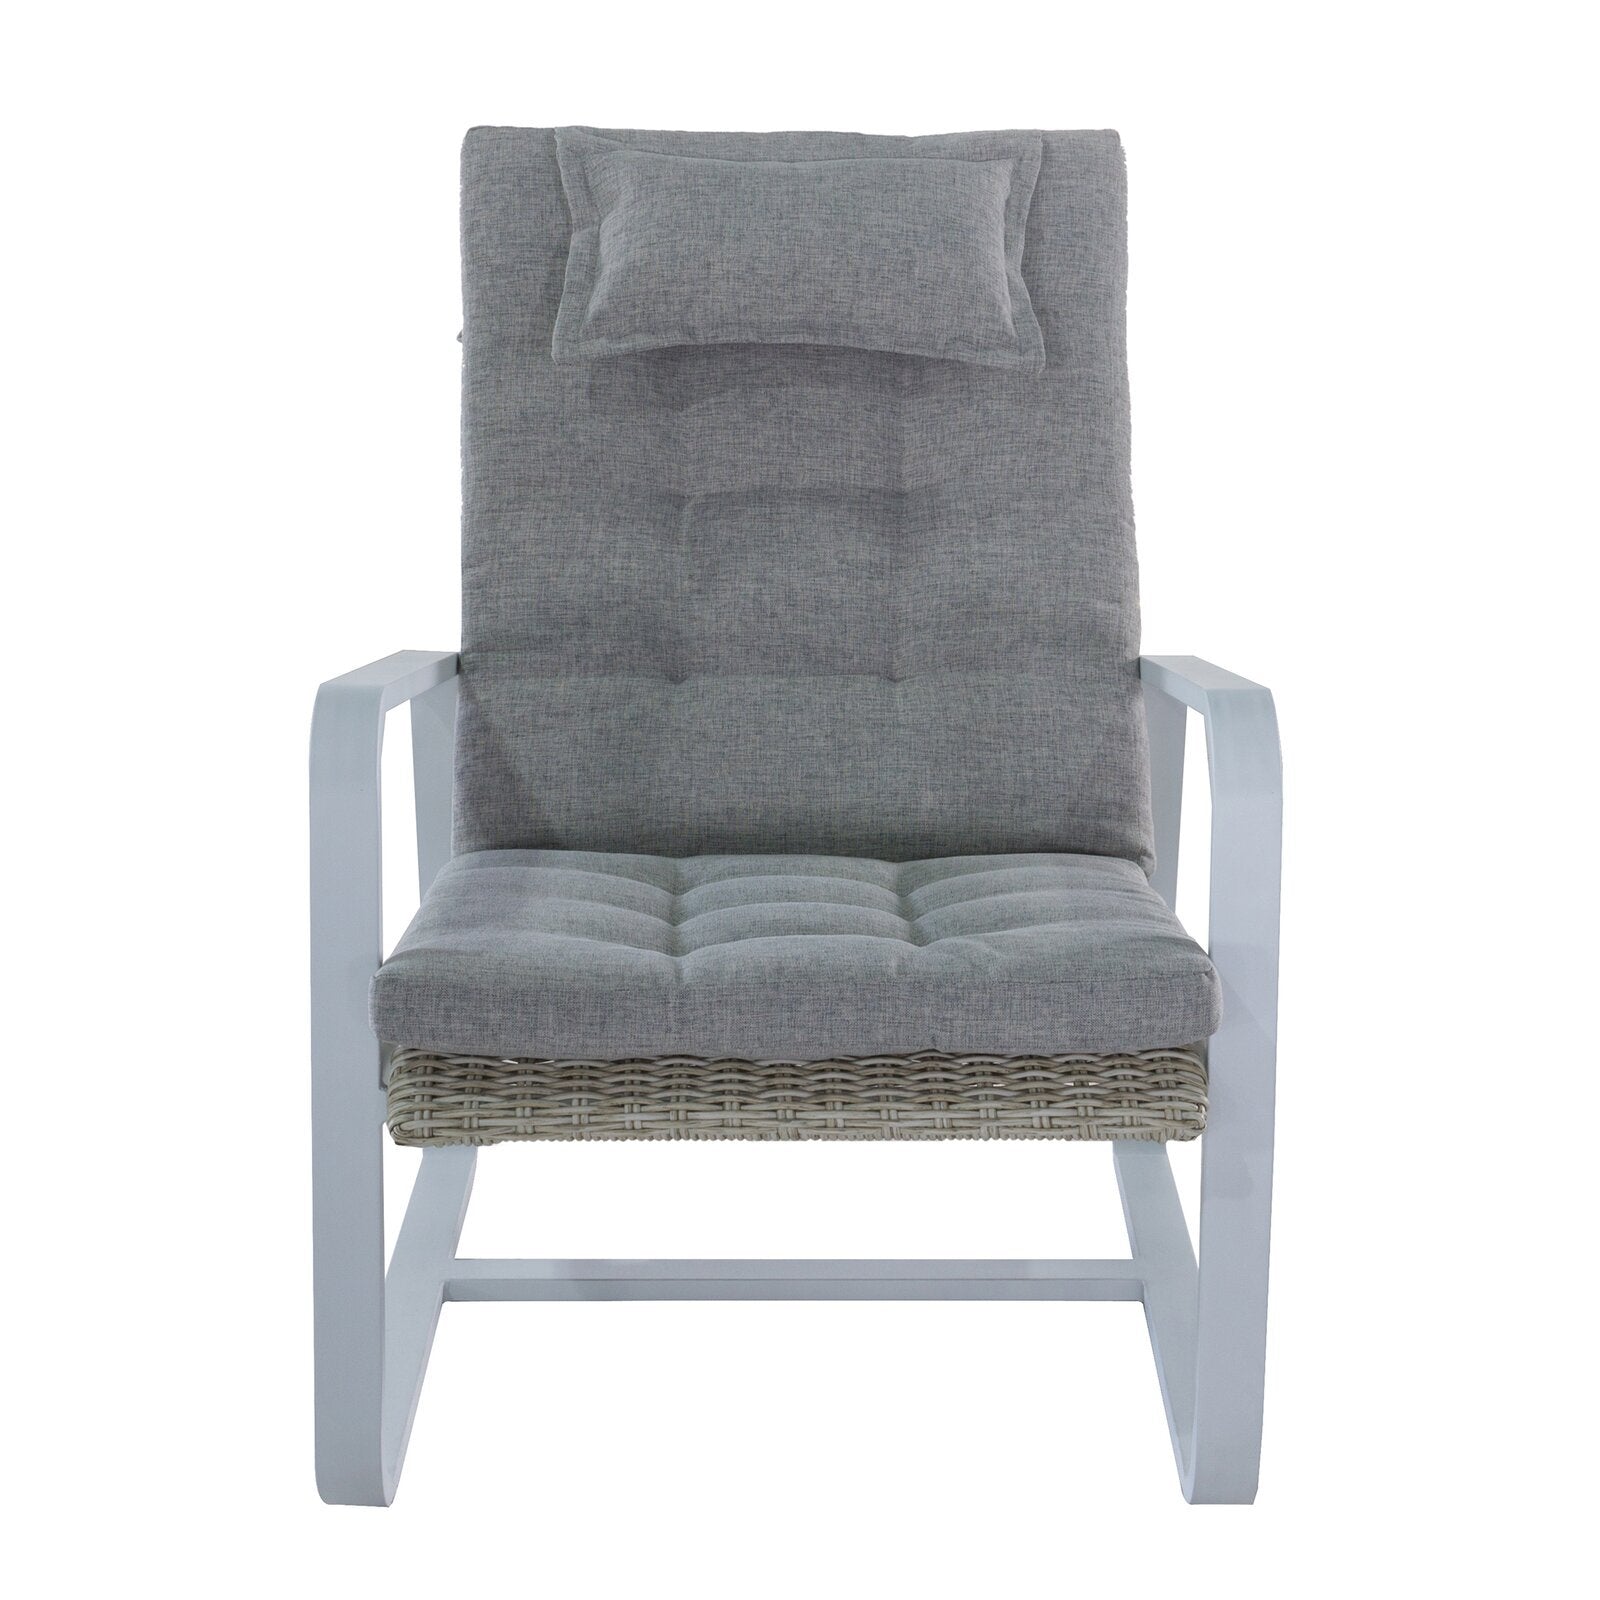 Outdoor Aluminum Frame Reclining Club Chair With Gray Cushion-Boyel Living